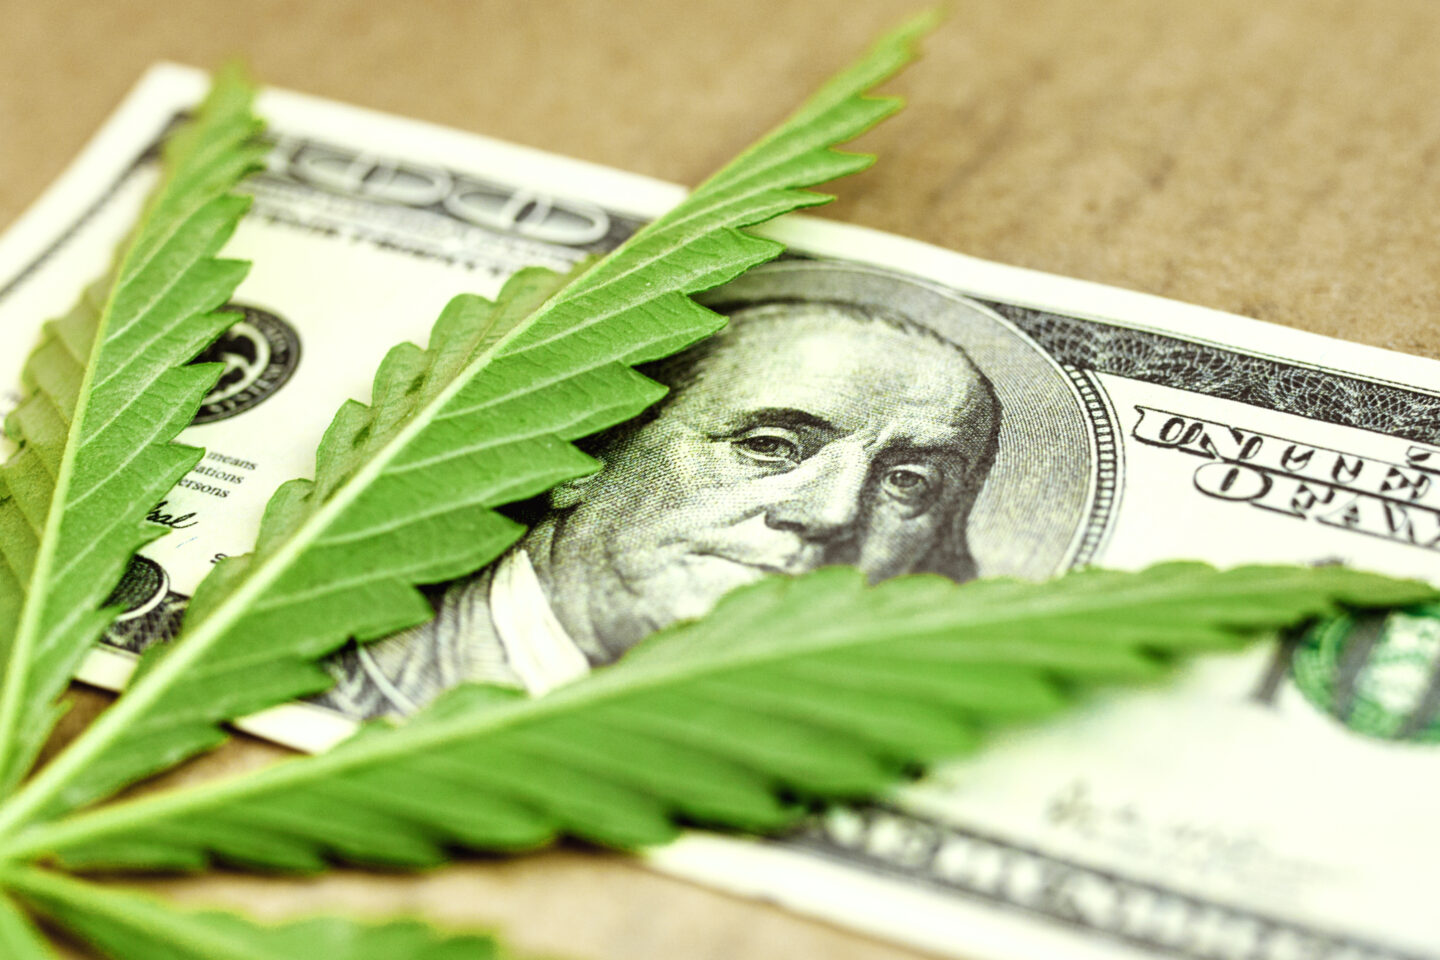 New Mexico Cannabis Jobs Pay More Than Accommodation, Food Service